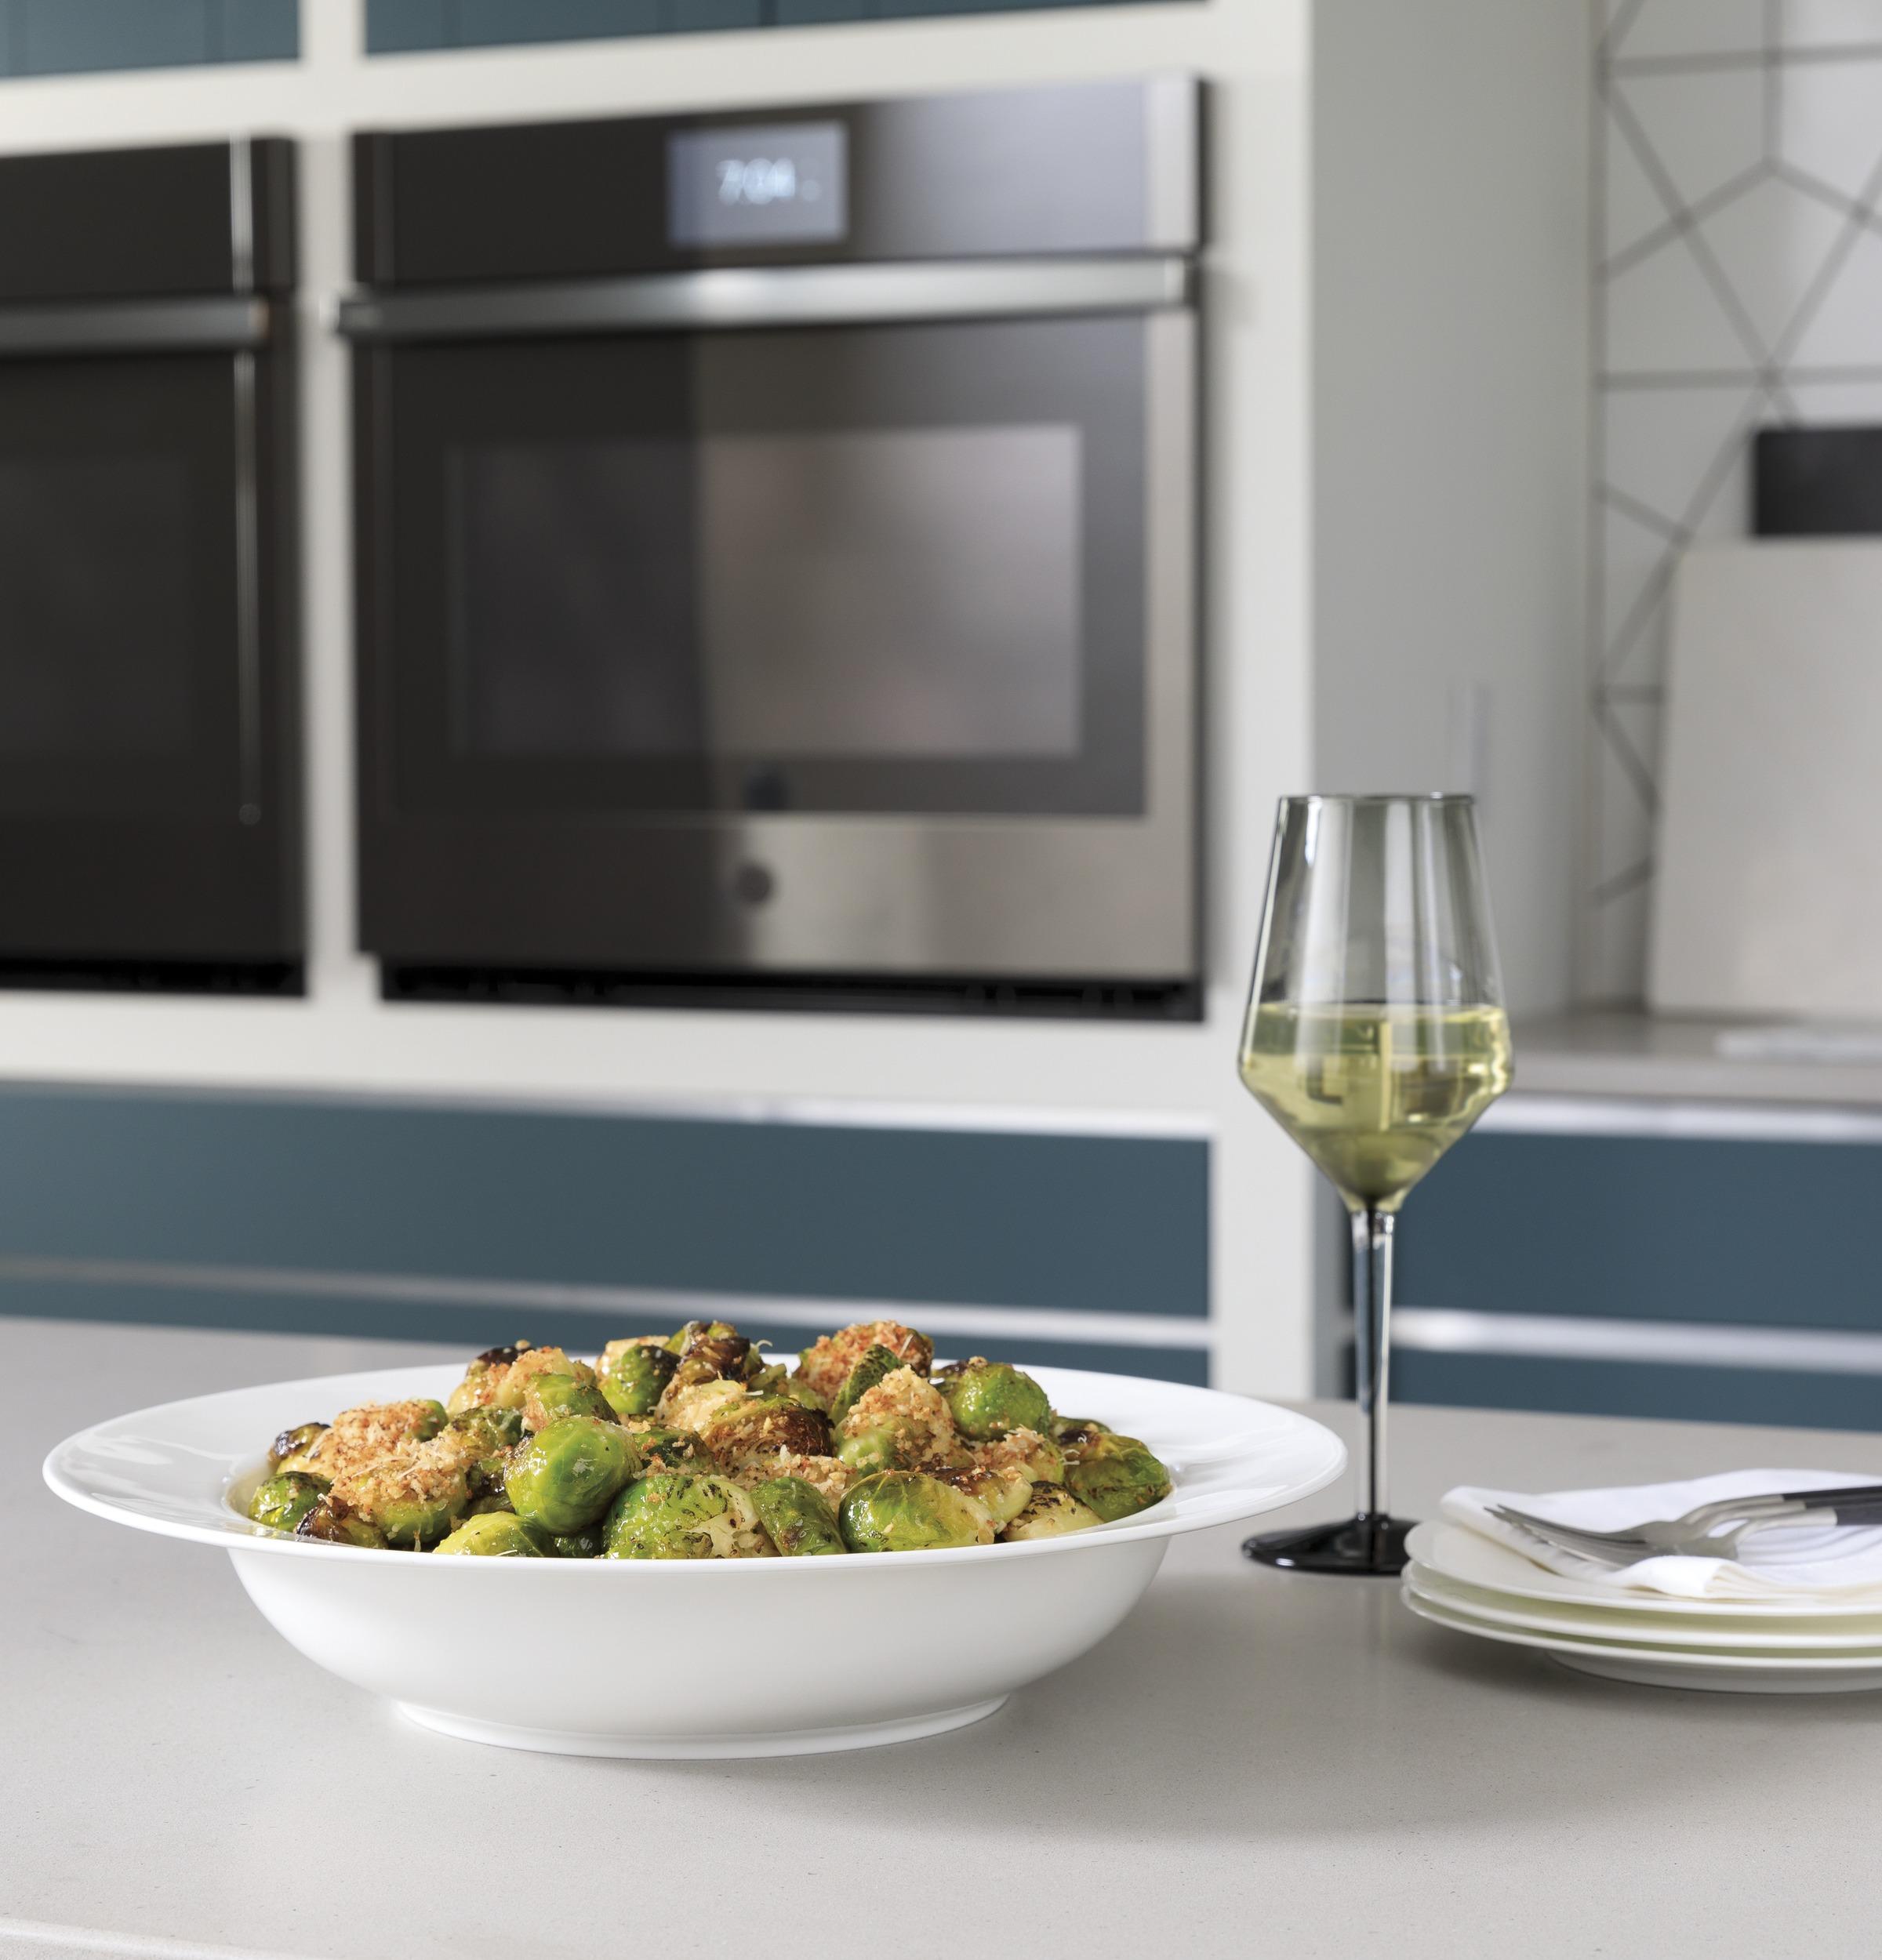 GE Profile™ 27" Smart Built-In Convection Single Wall Oven